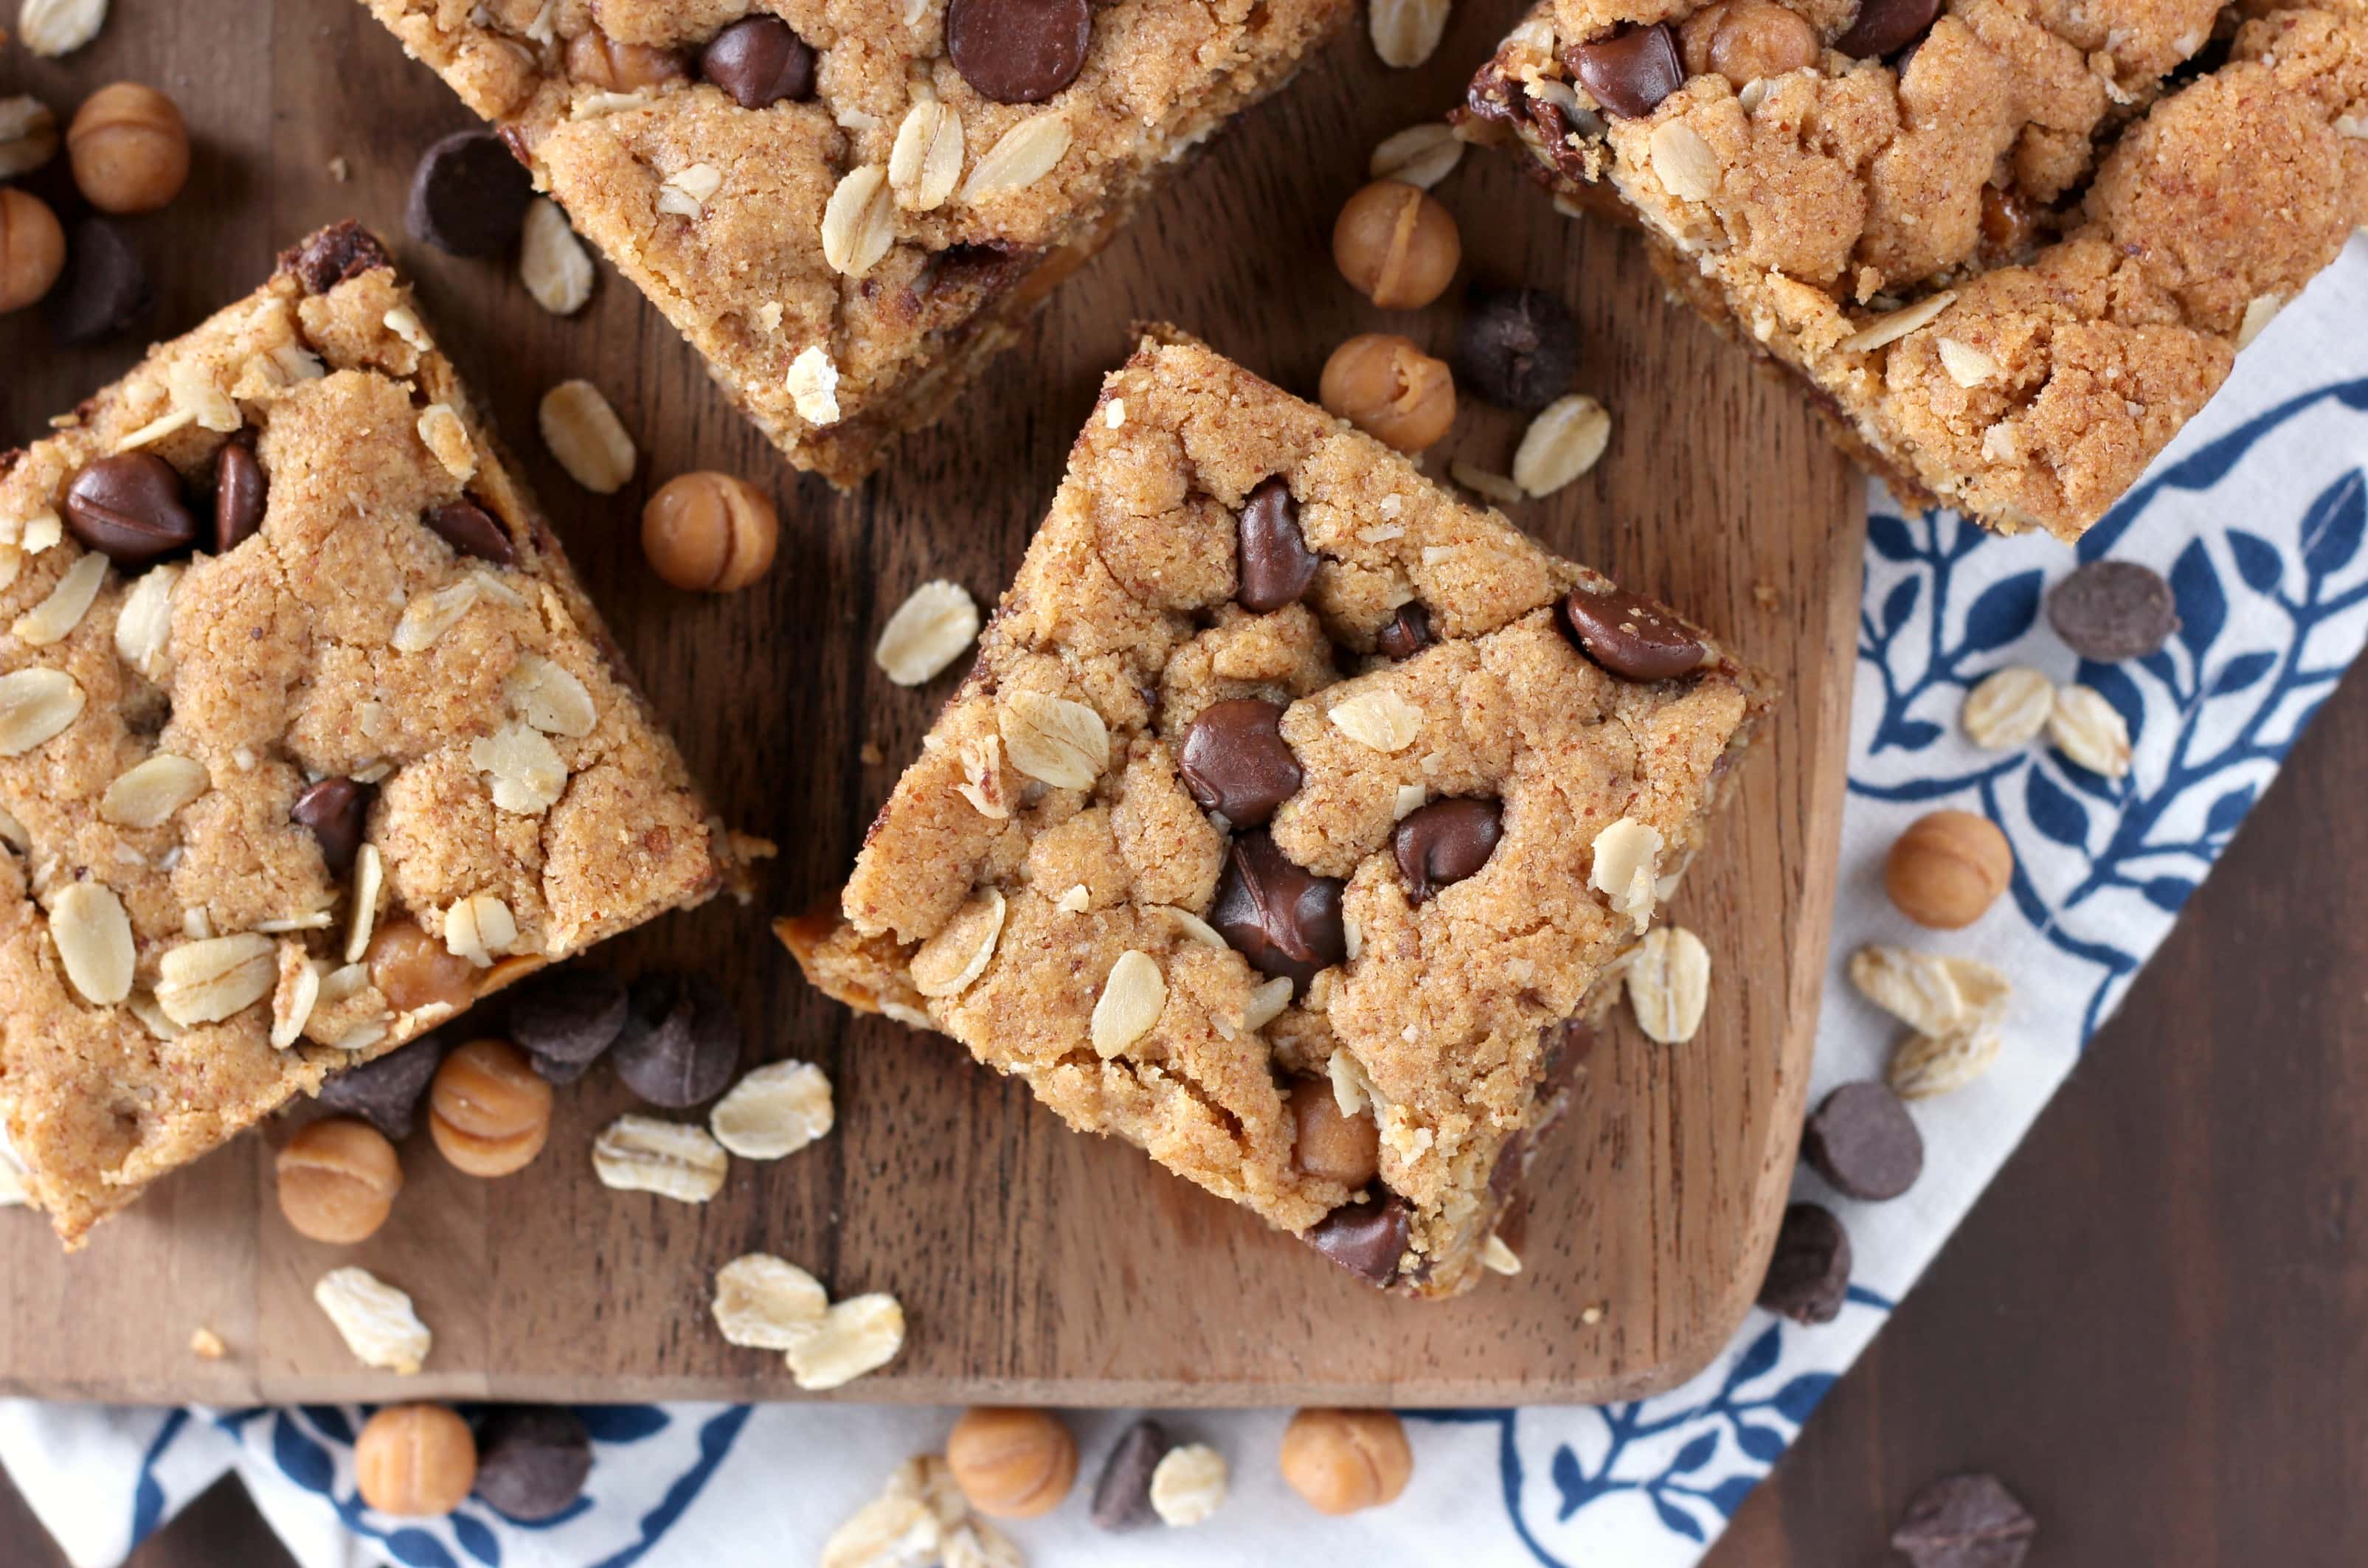 Chocolate Caramel Almond Butter Oat Bars Recipe from A Kitchen Addiction